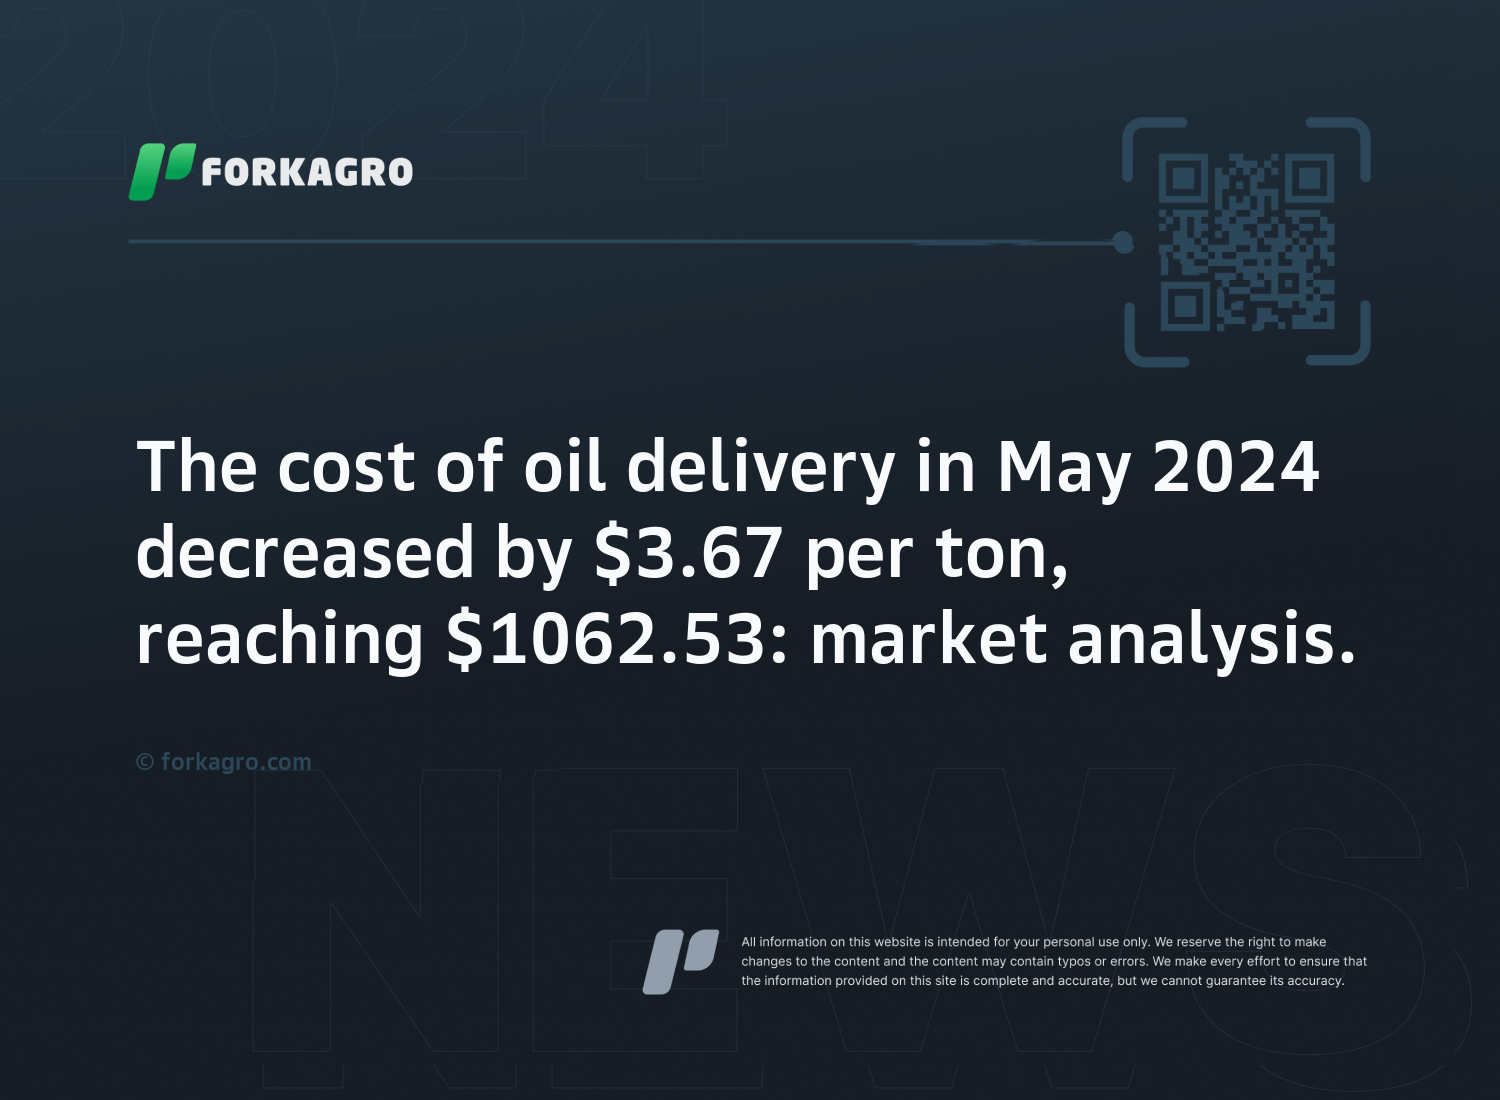 The cost of oil delivery in May 2024 decreased by $3.67 per ton, reaching $1062.53: market analysis.